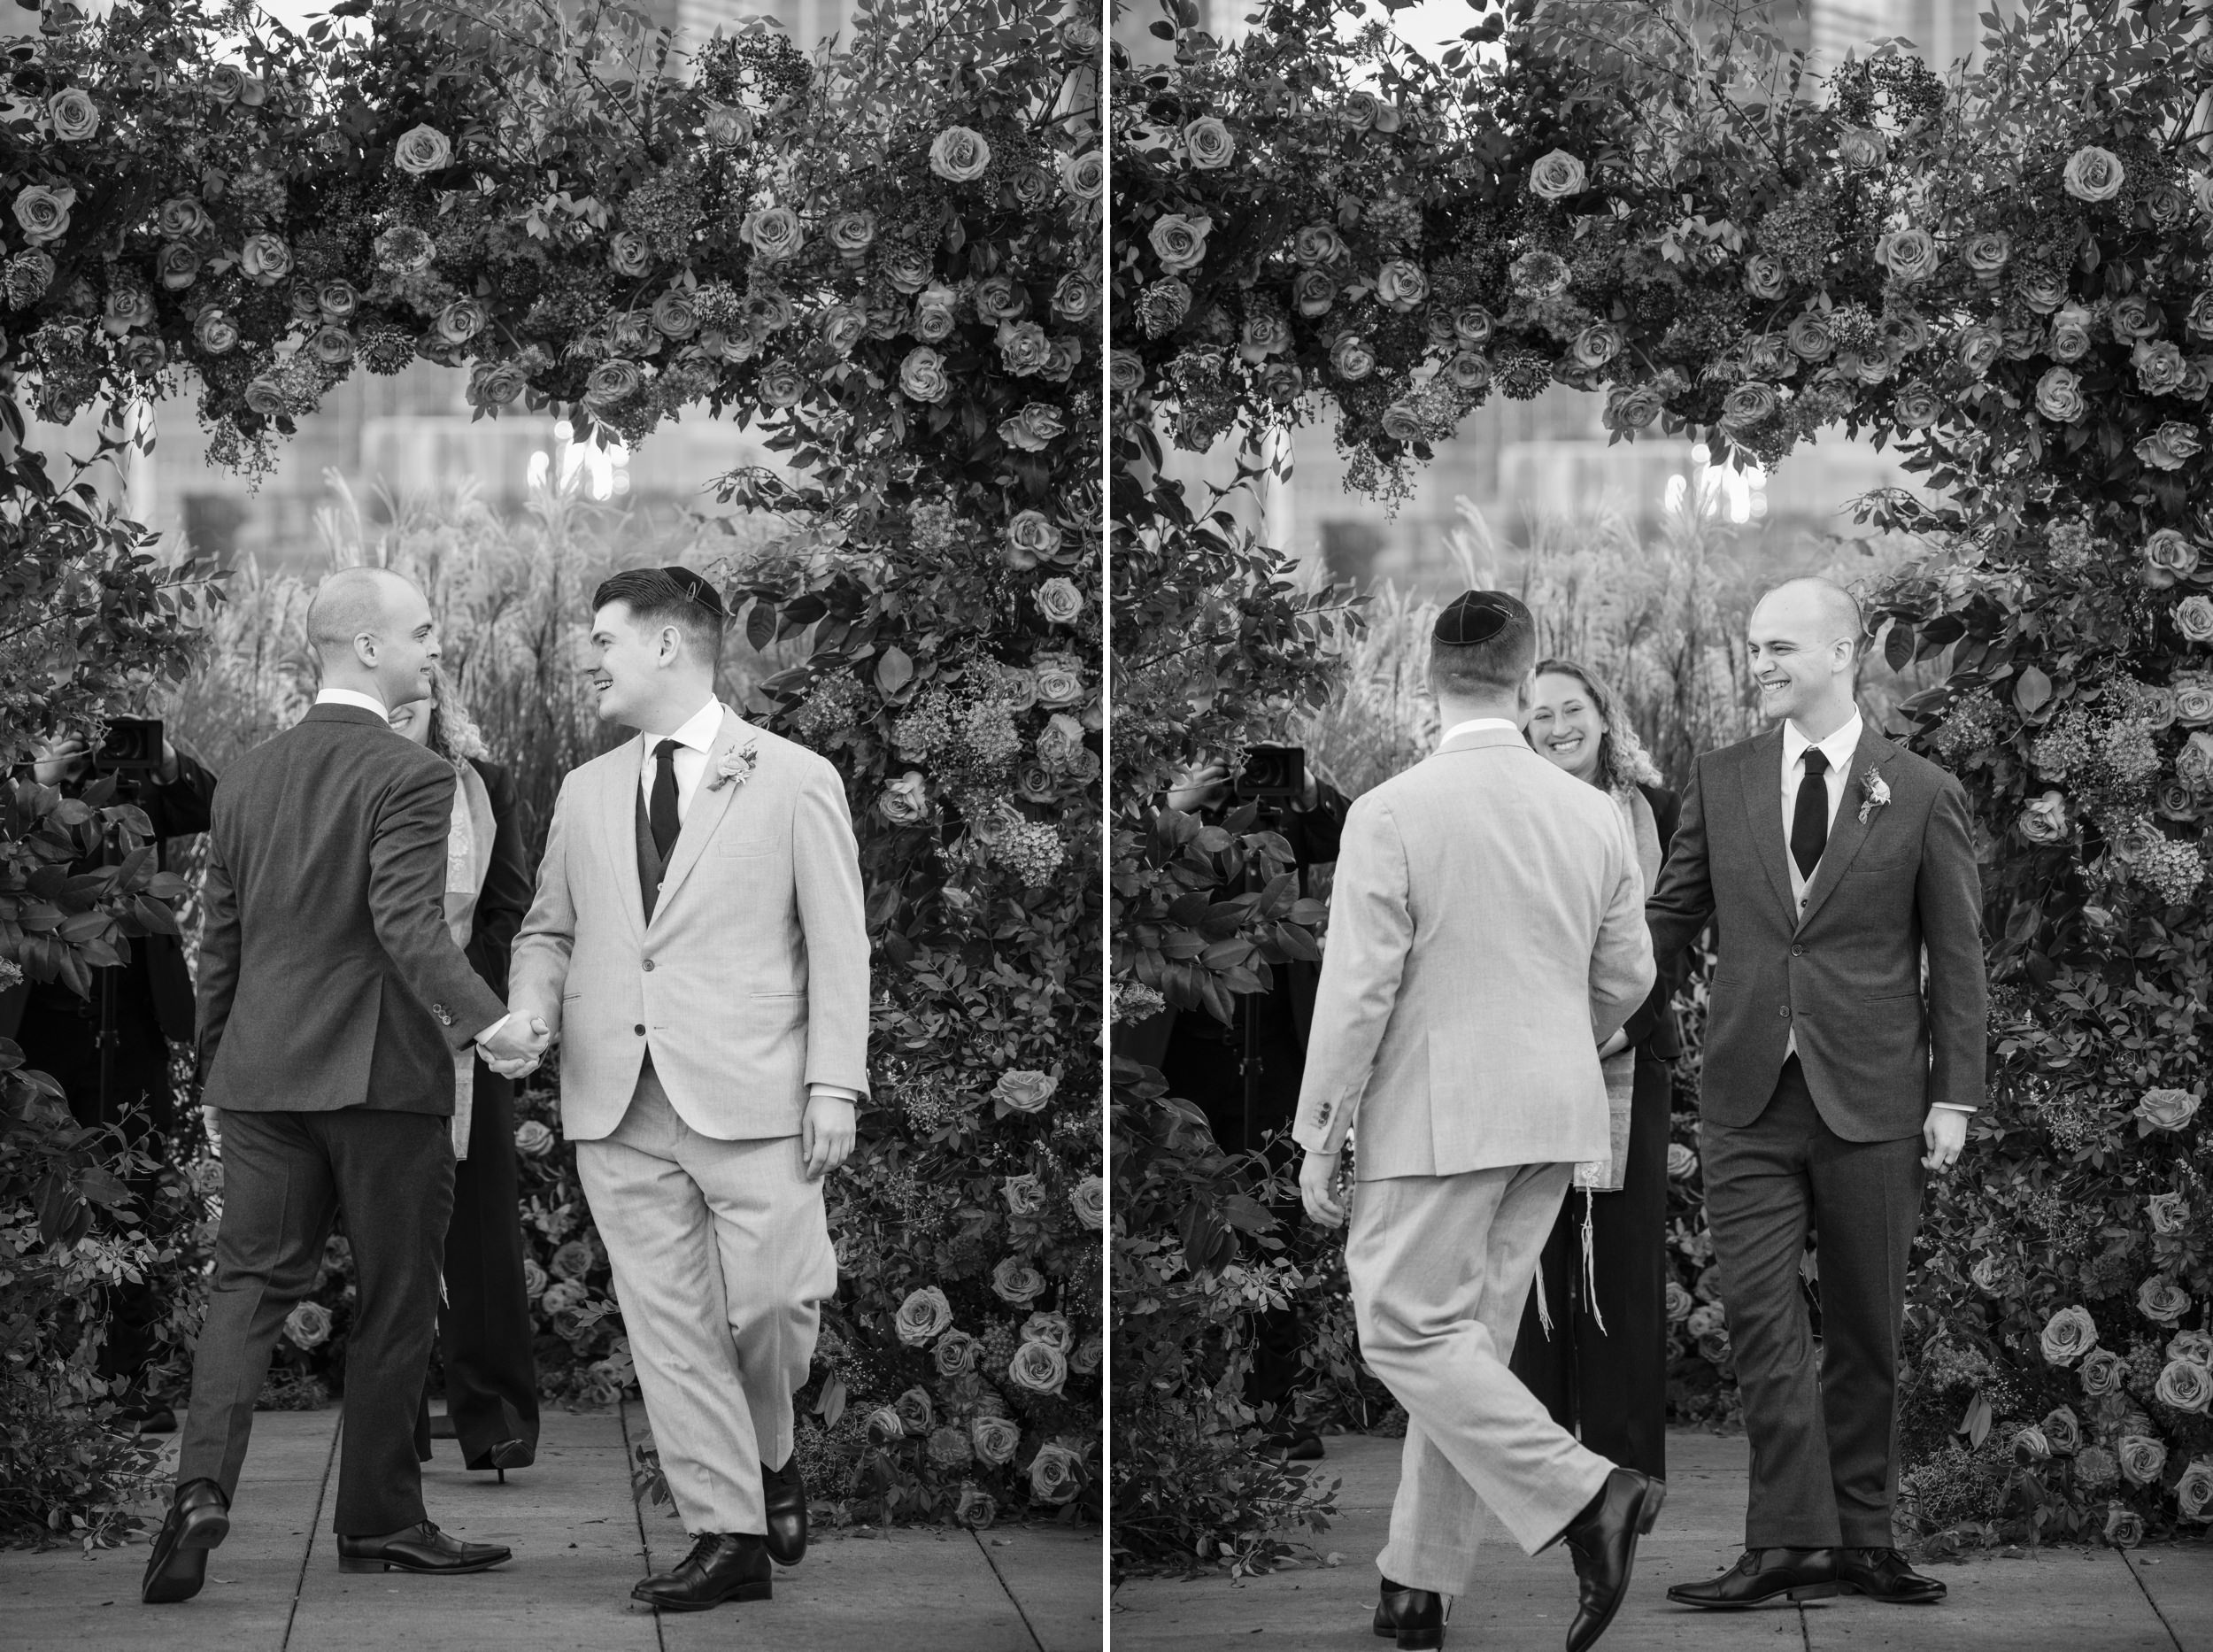 Grooms circle each other in front of a flower arch at a Tribeca Rooftop wedding